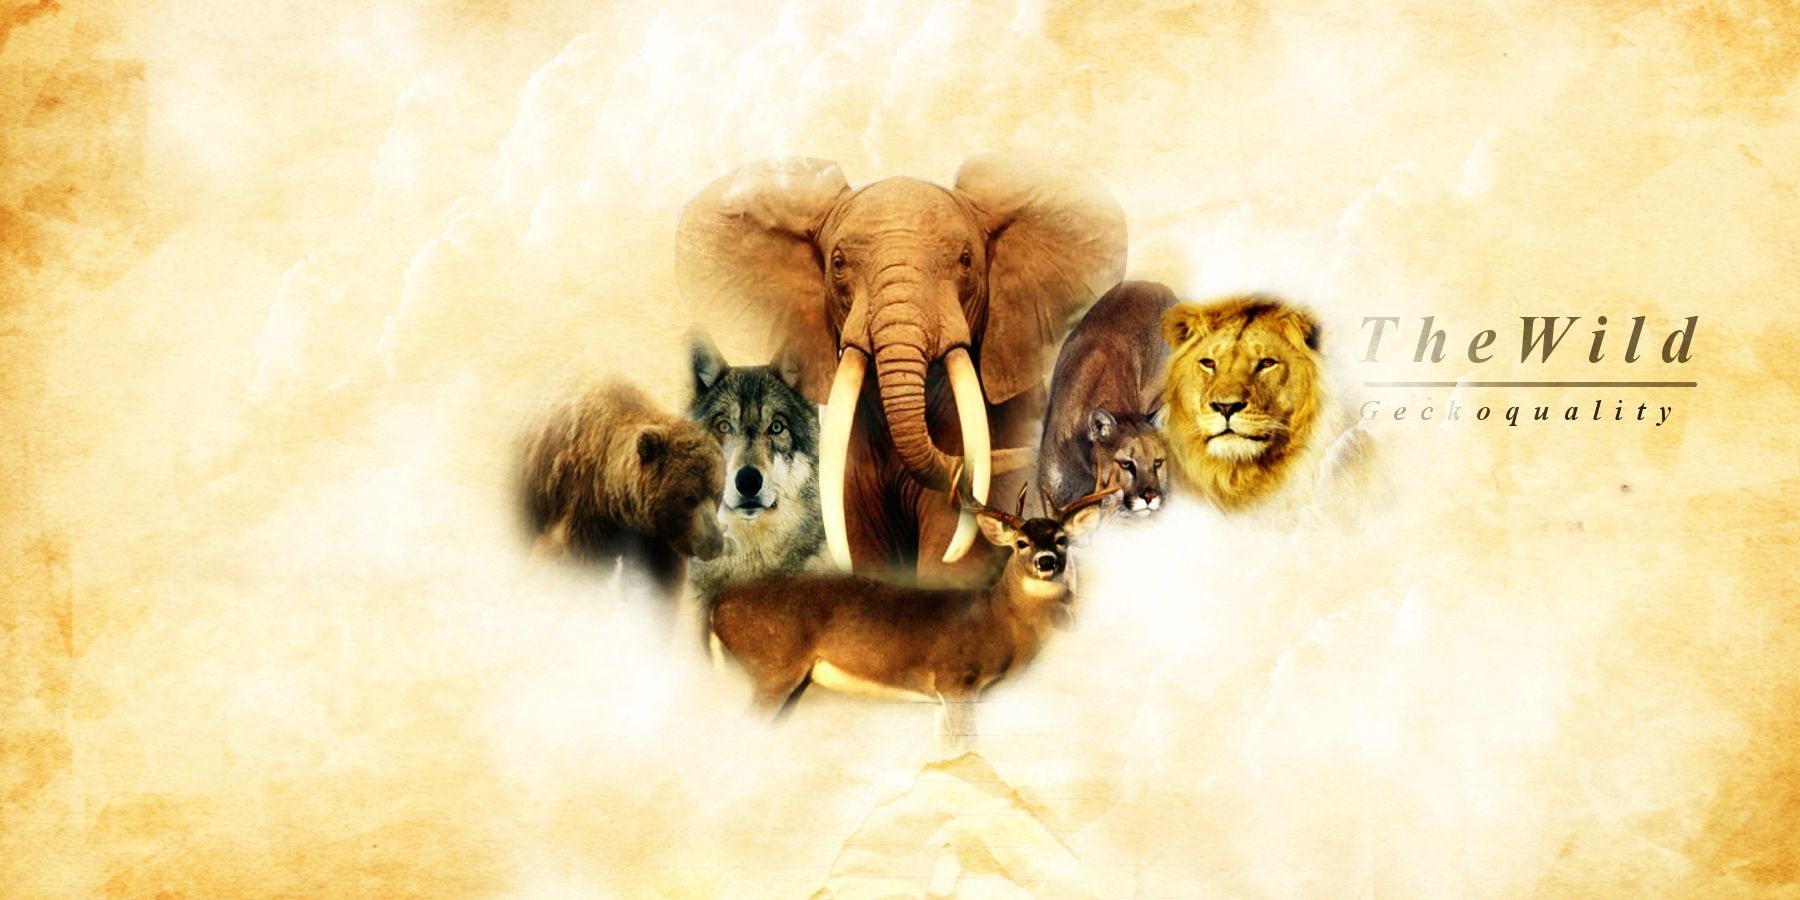 Download wallpaper with animals Collage with tags: Windows